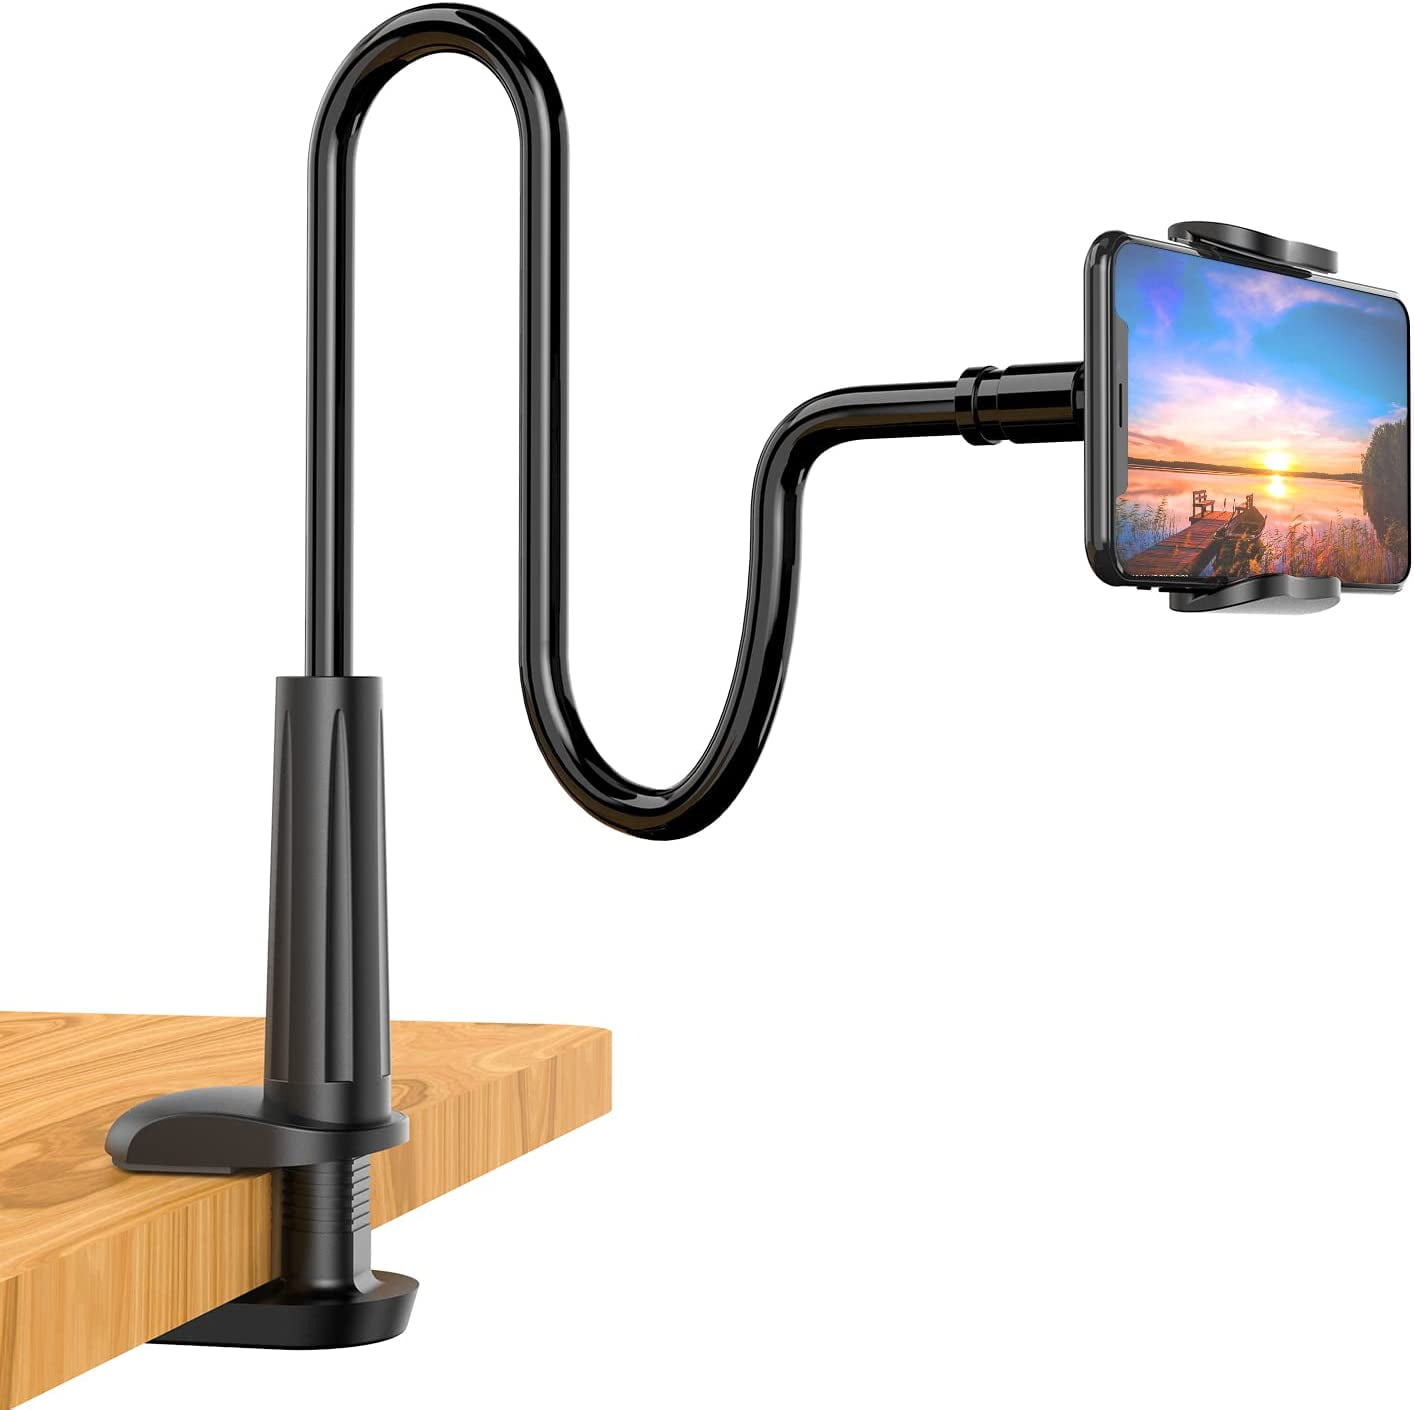  Lamicall Gooseneck Phone Holder for Bed - Overall Length  38.6in, Flexible Leather Wrapped Arm, 360 Adjustable Clamp Clip, Overhead  Cell Phone Mount Stand for Desk, Compatible with All Cellphone (4-7”) 